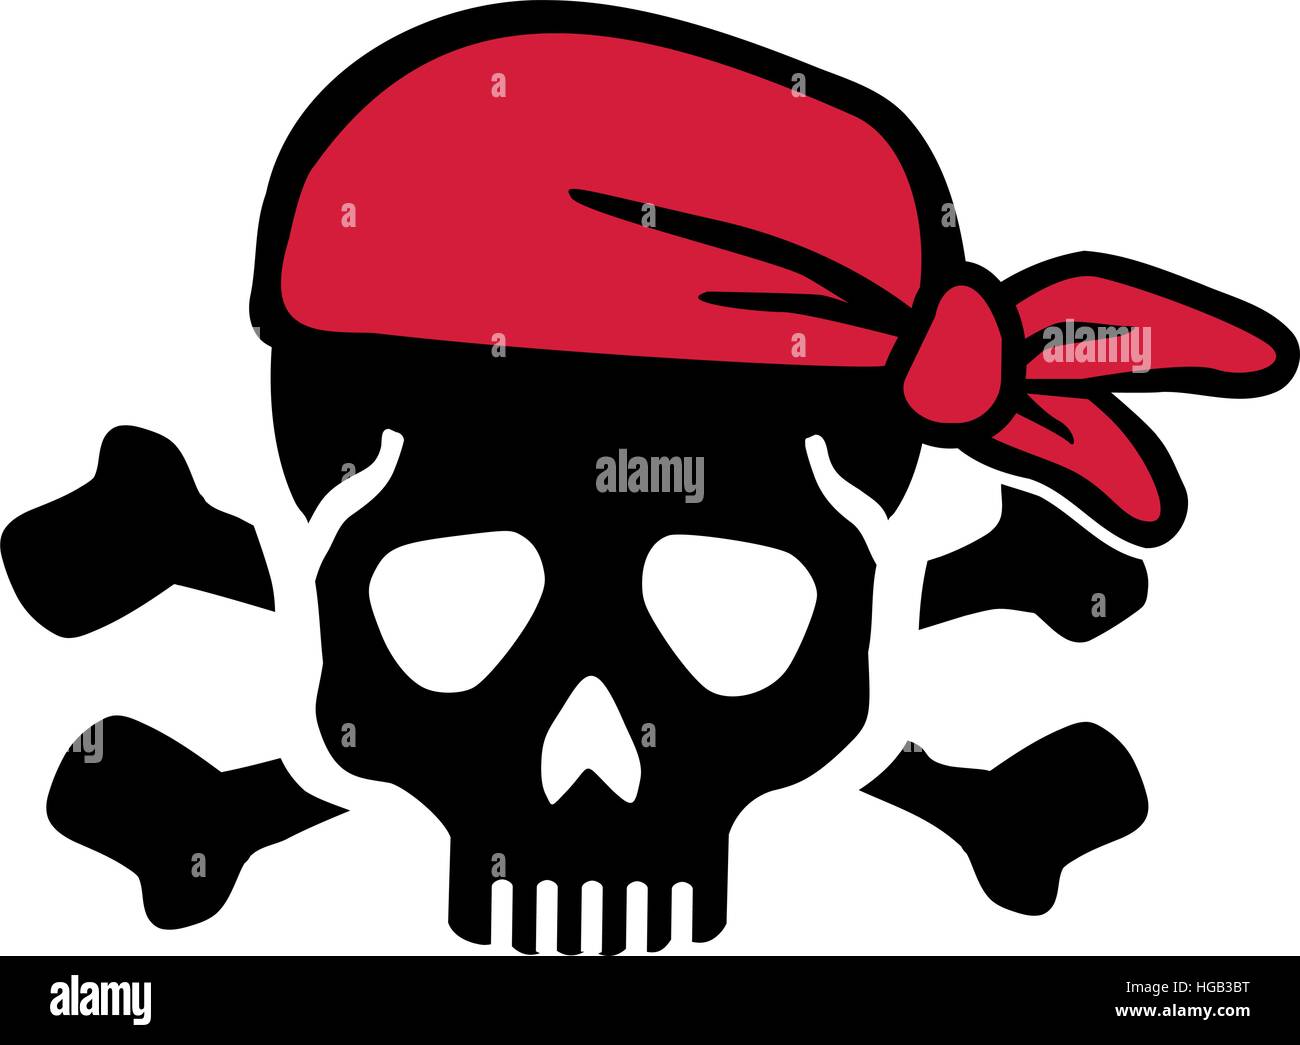 Pirate skull with bones and red headscarf Stock Vector